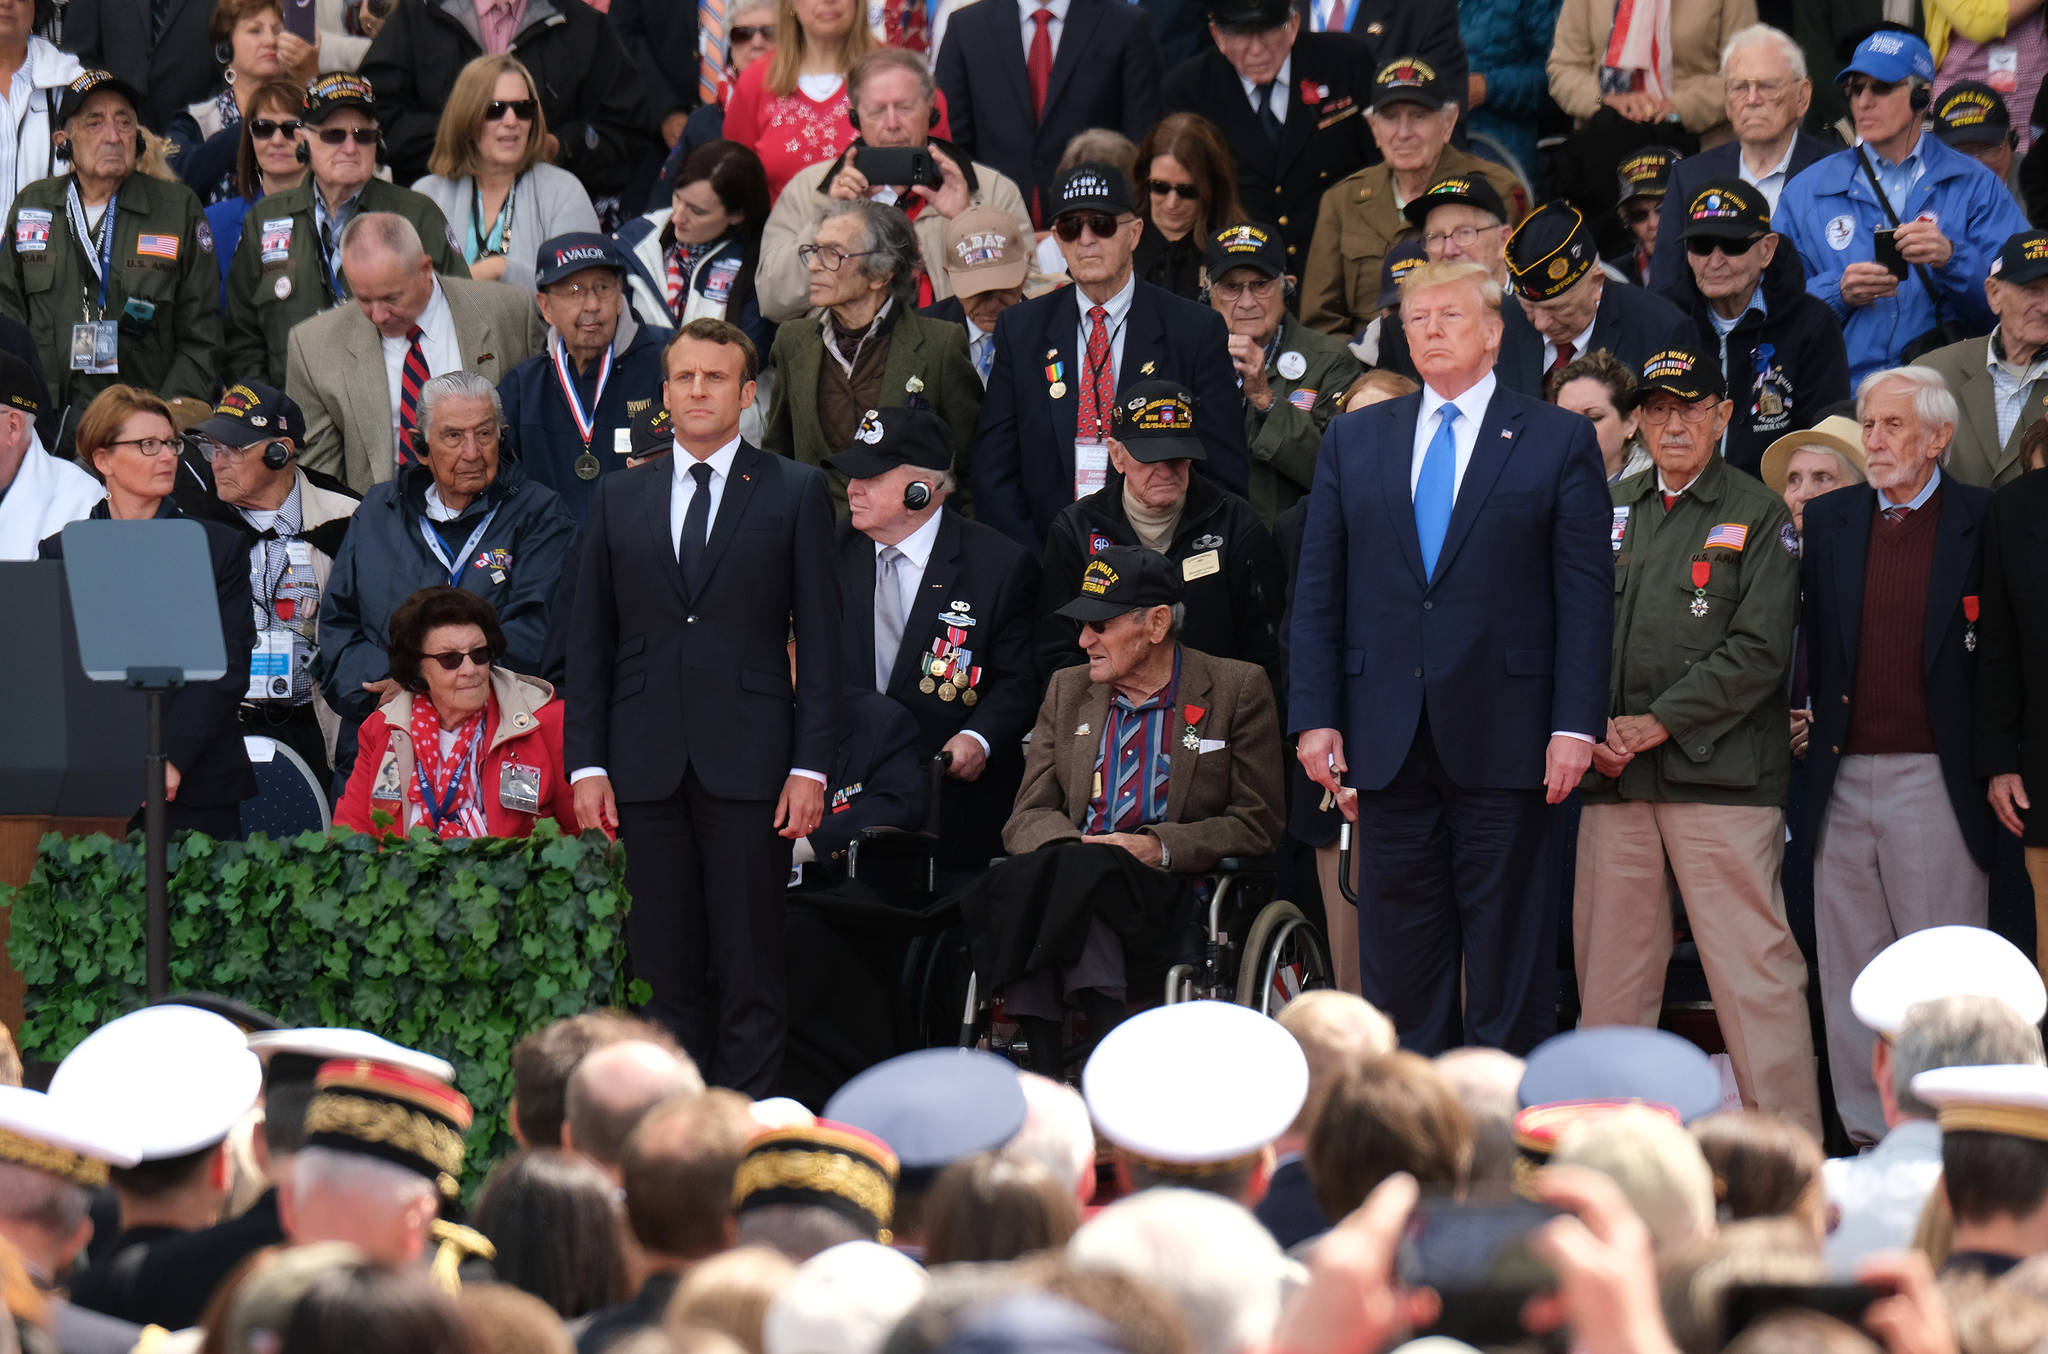 U.S. President Donald Trump and French President Emmanuel Macron stand as American Battle of Normandy veterans and family members look on during the main ceremony to mark the 75th anniversary of the World War II Allied D-Day invasion of Normandy at Normandy American Cemetery Thursday near Colleville-Sur-Mer, France. (Sean Gallup/Getty Images/TNS)